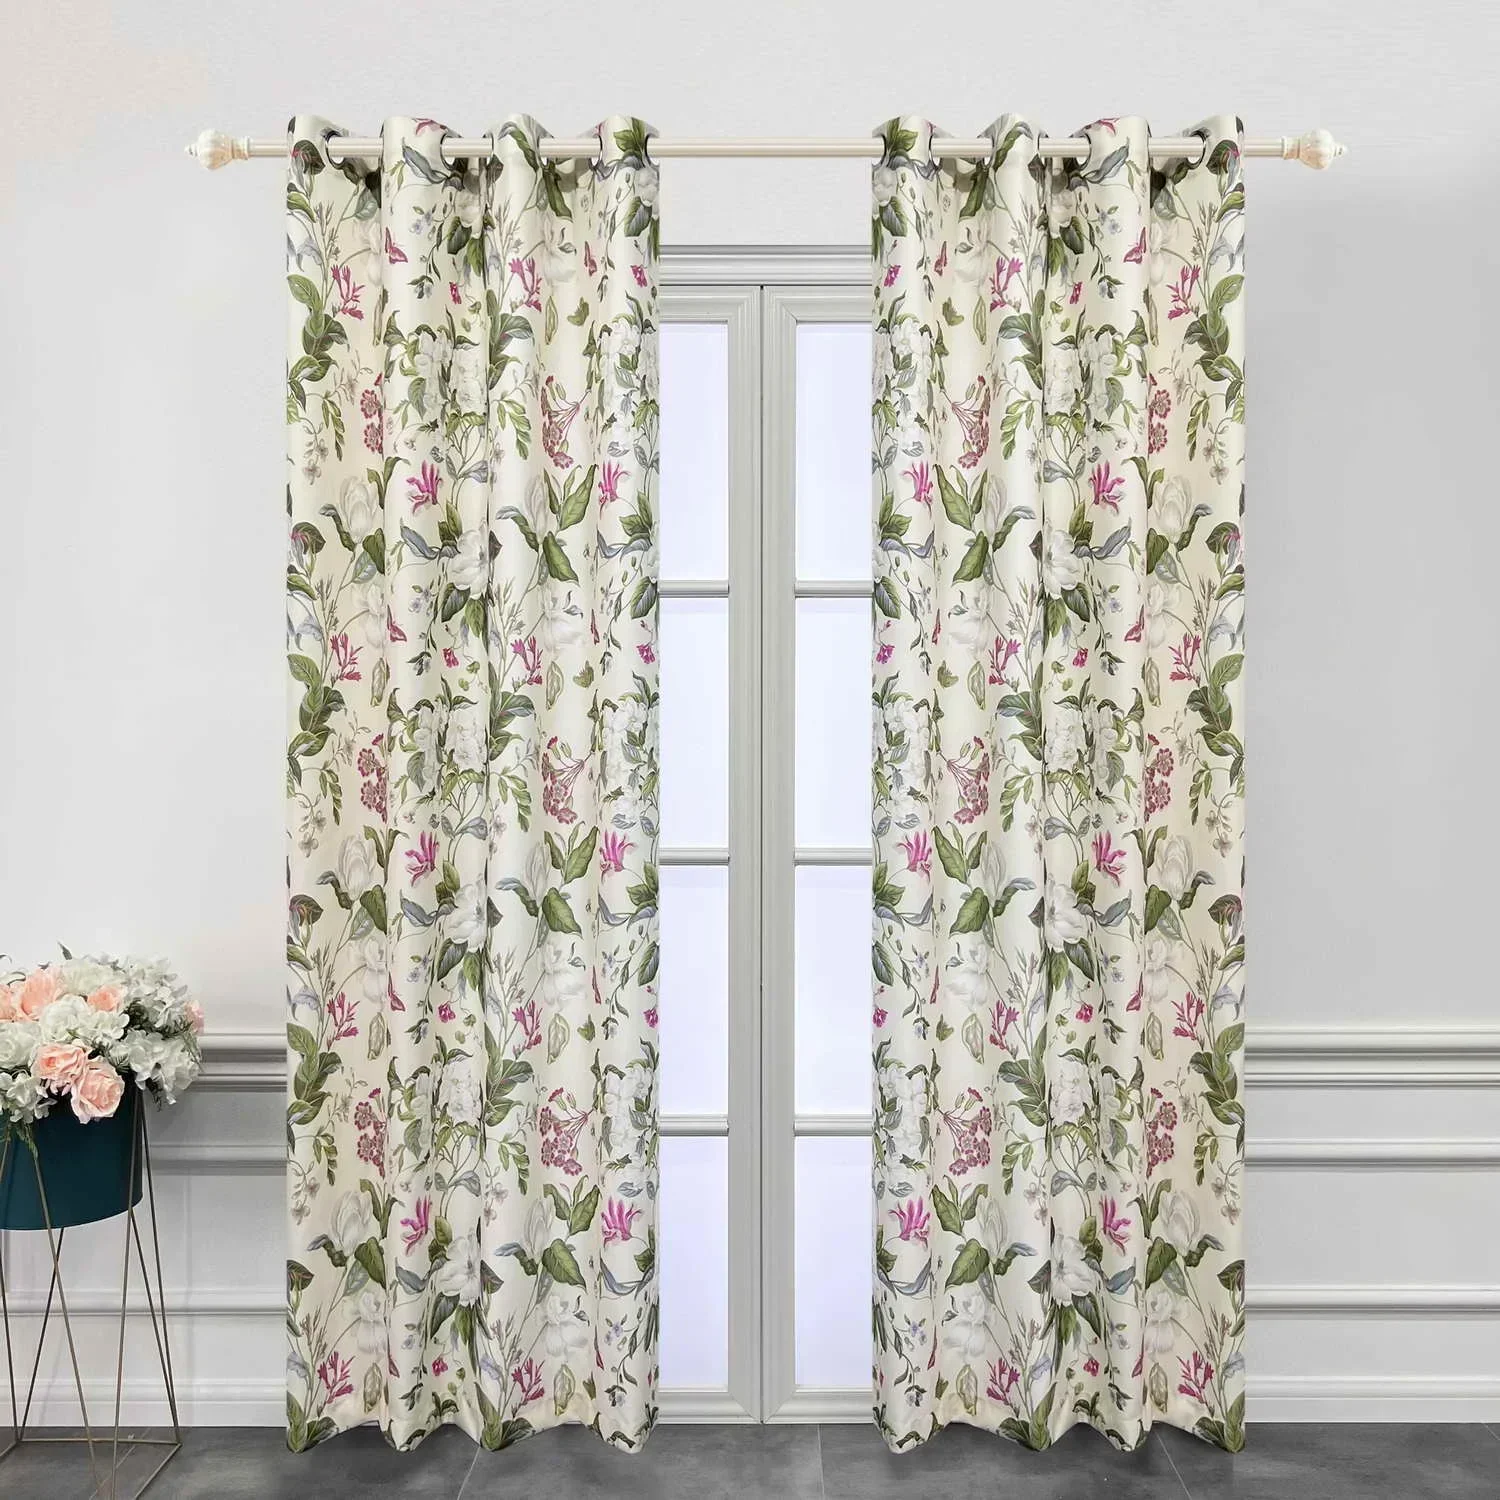 

Korean Style Pastoral Rural Blackout Curtains for Bedroom Living Room Cotton Linen Window Splicing Villa French Balcony Drapes